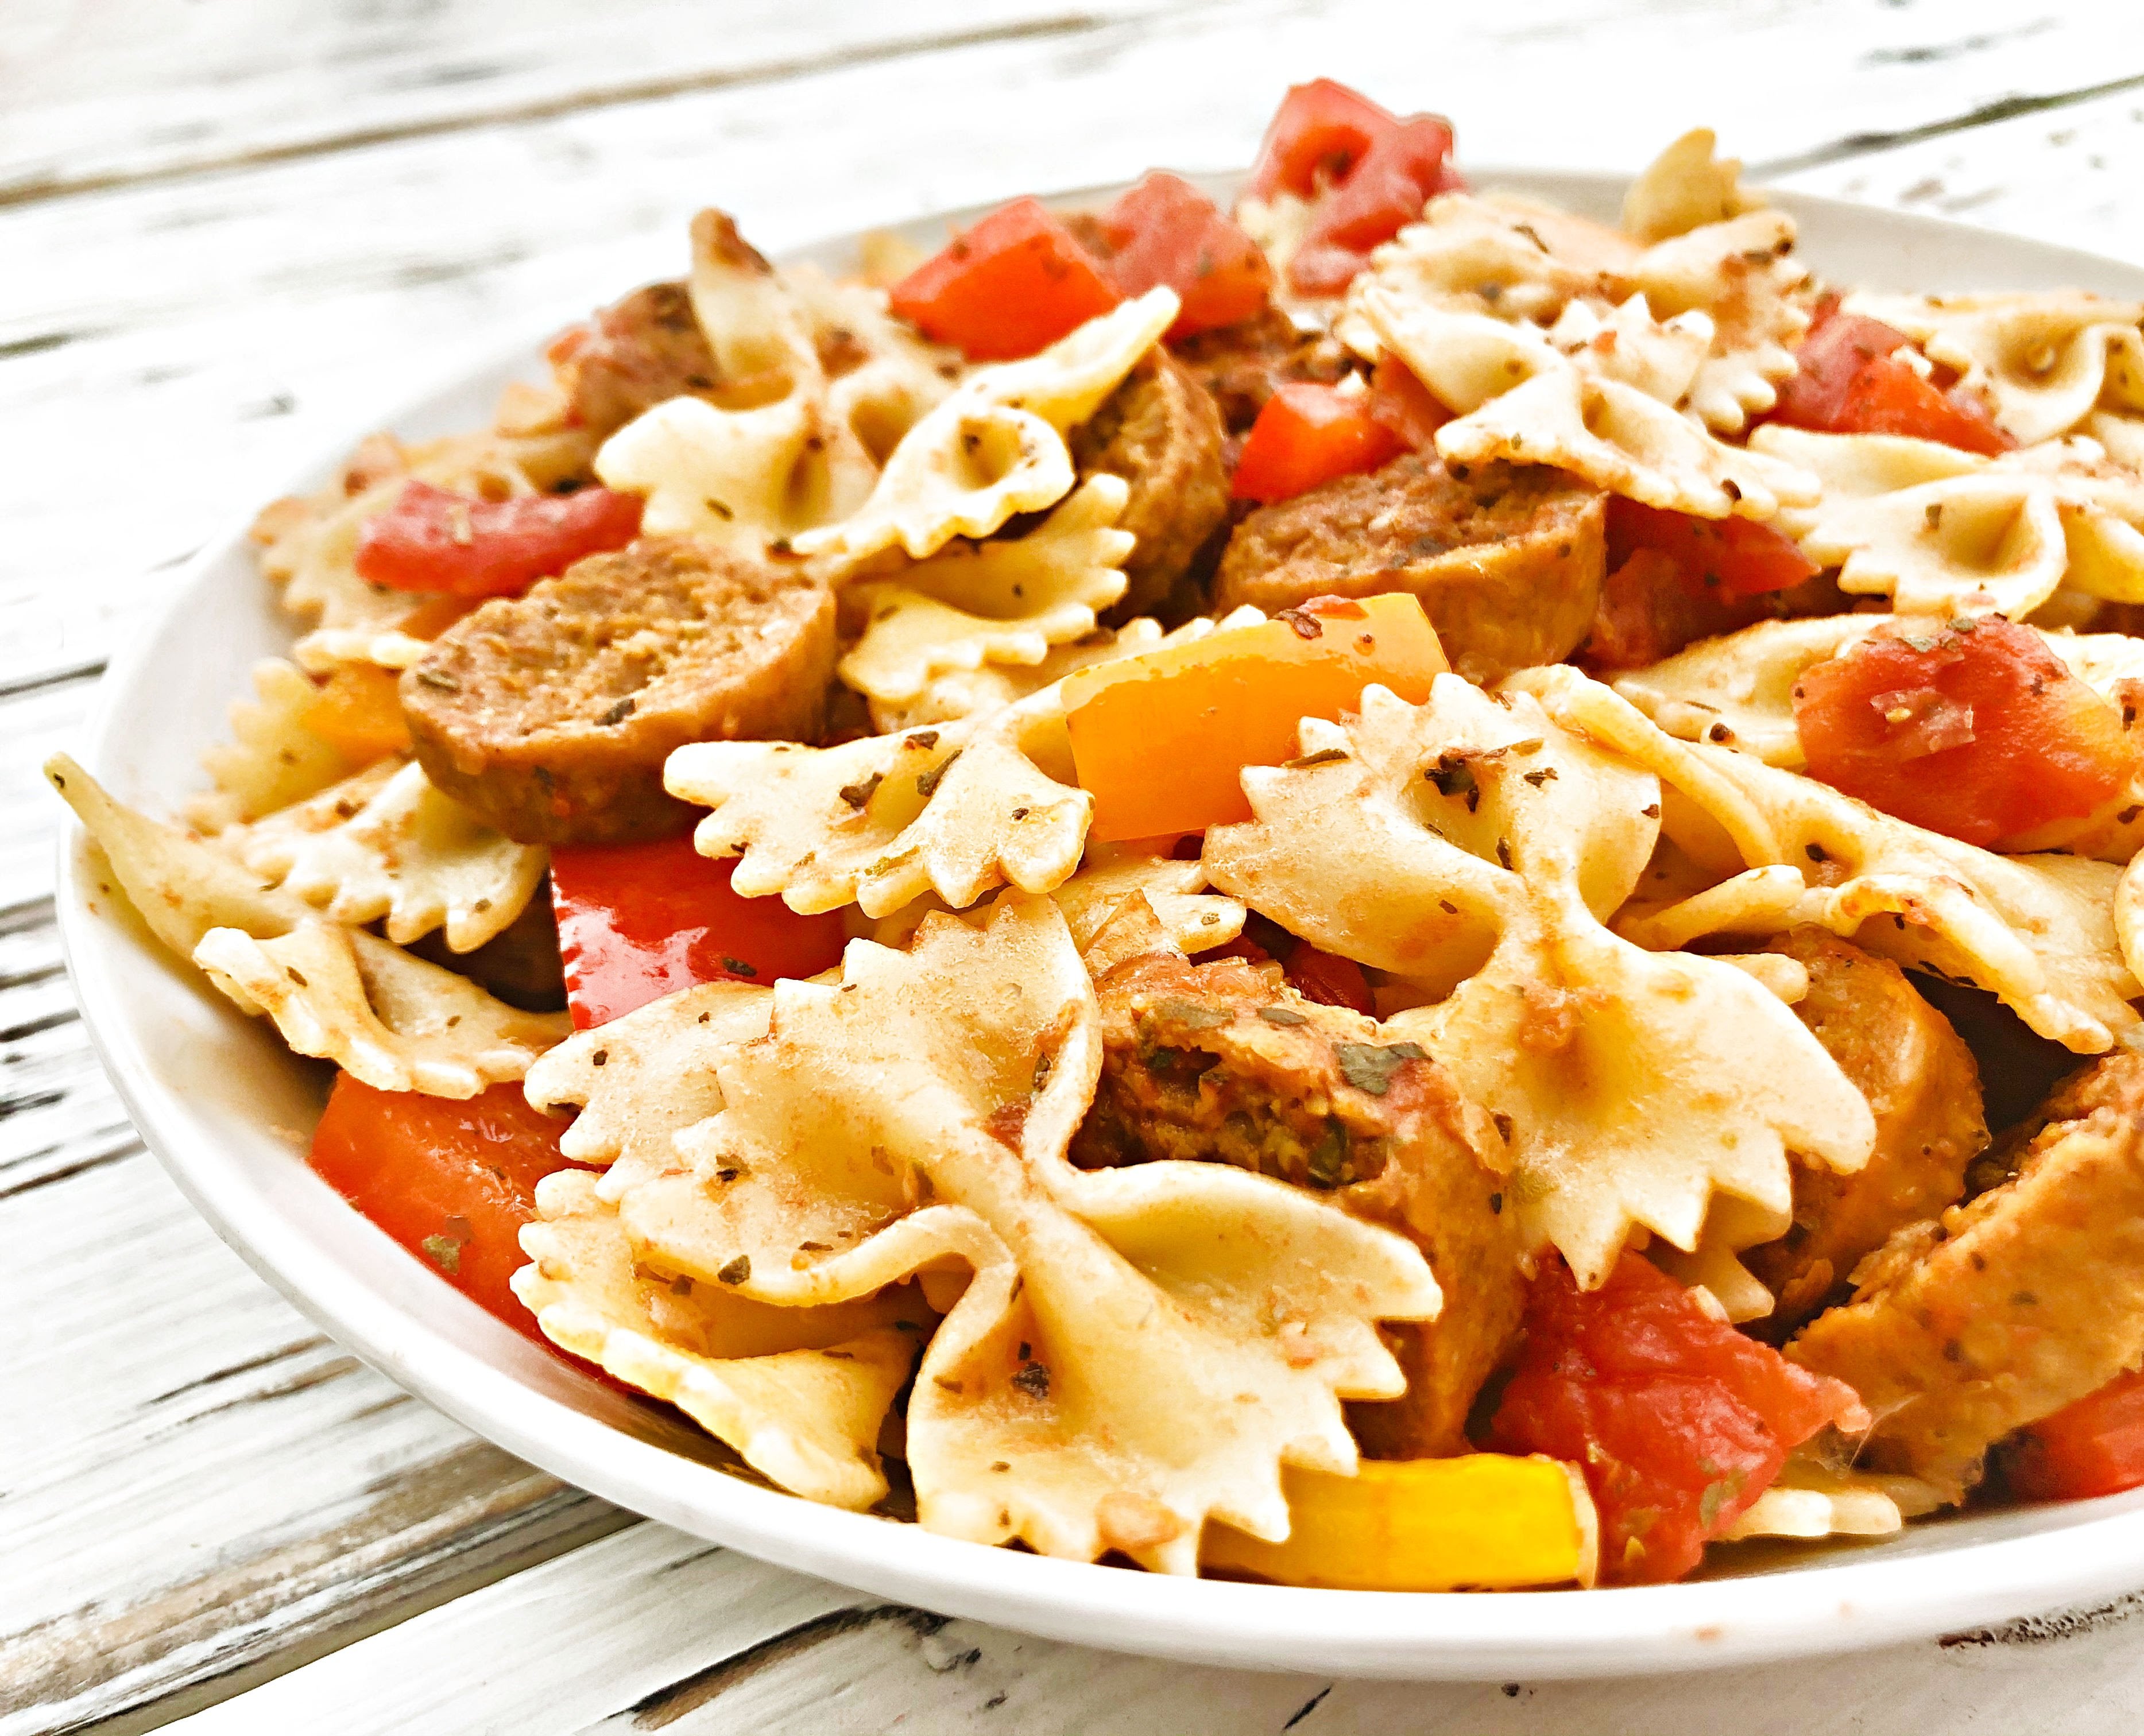 Vegan Sausage and Peppers Pasta - A quick and easy plant-based skillet dinner filled with spicy Italian sausage, colorful bell peppers, and pasta tossed together in a light and earthy tomato sauce. Ready to serve in 30 minutes or less!

#sausageandpeppers #easyvegandinners #30minutemeals #vegansausagerecipes #thiswifecooksrecipes #quickandeasydinners #veganquarantinecooking #sausageandpepperspasta via @thiswifecooks